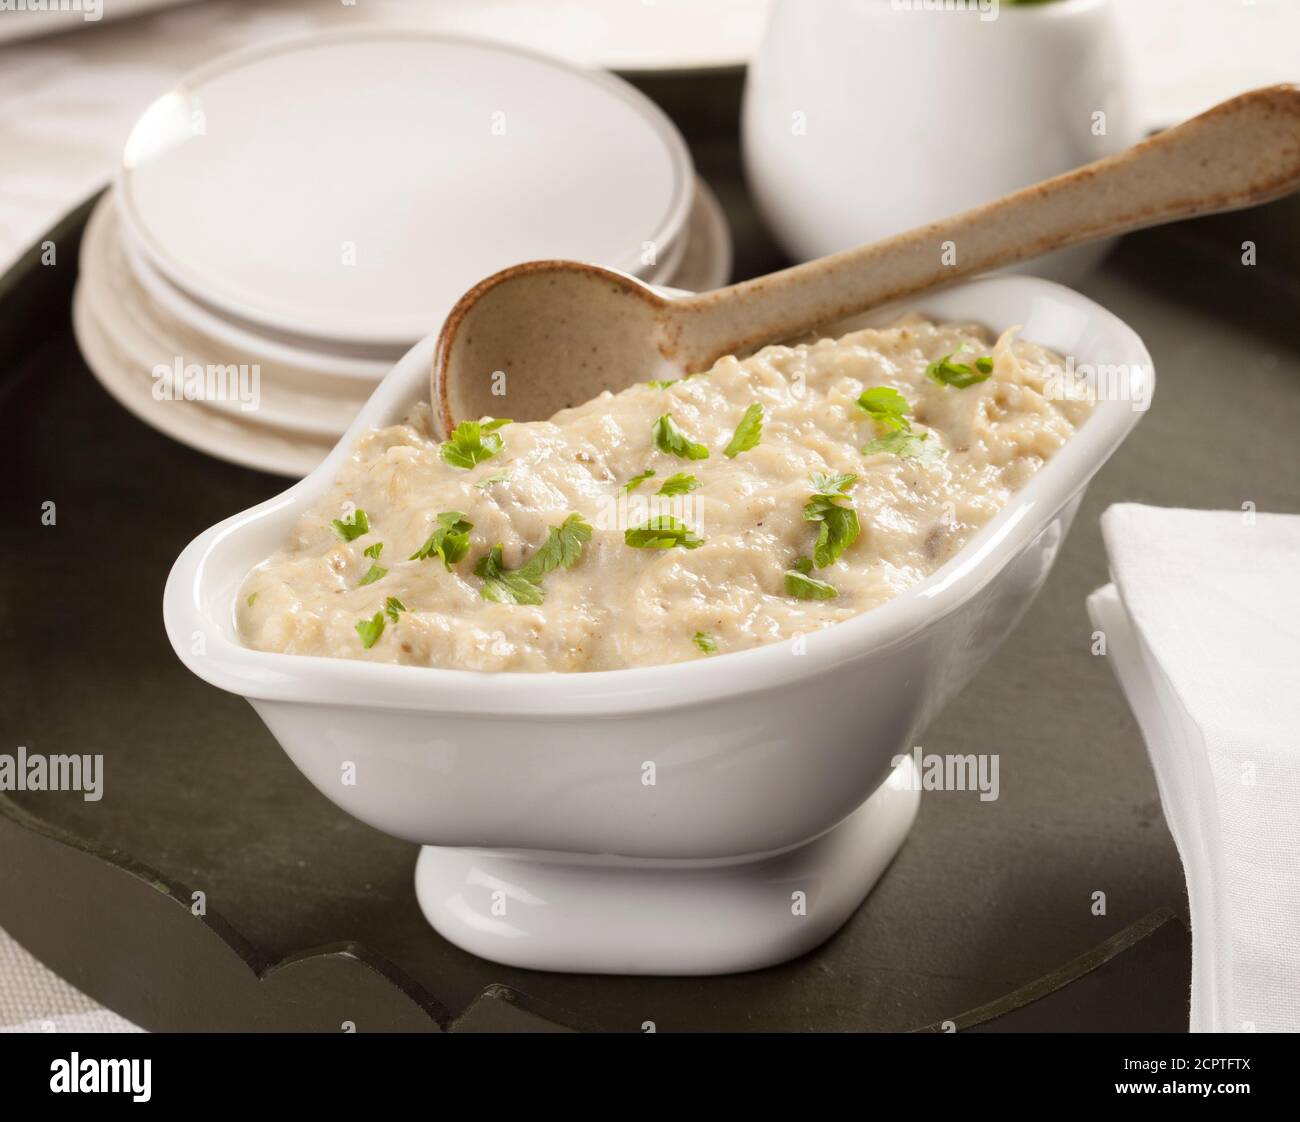 Eggplant dip typical from Greece Stock Photo